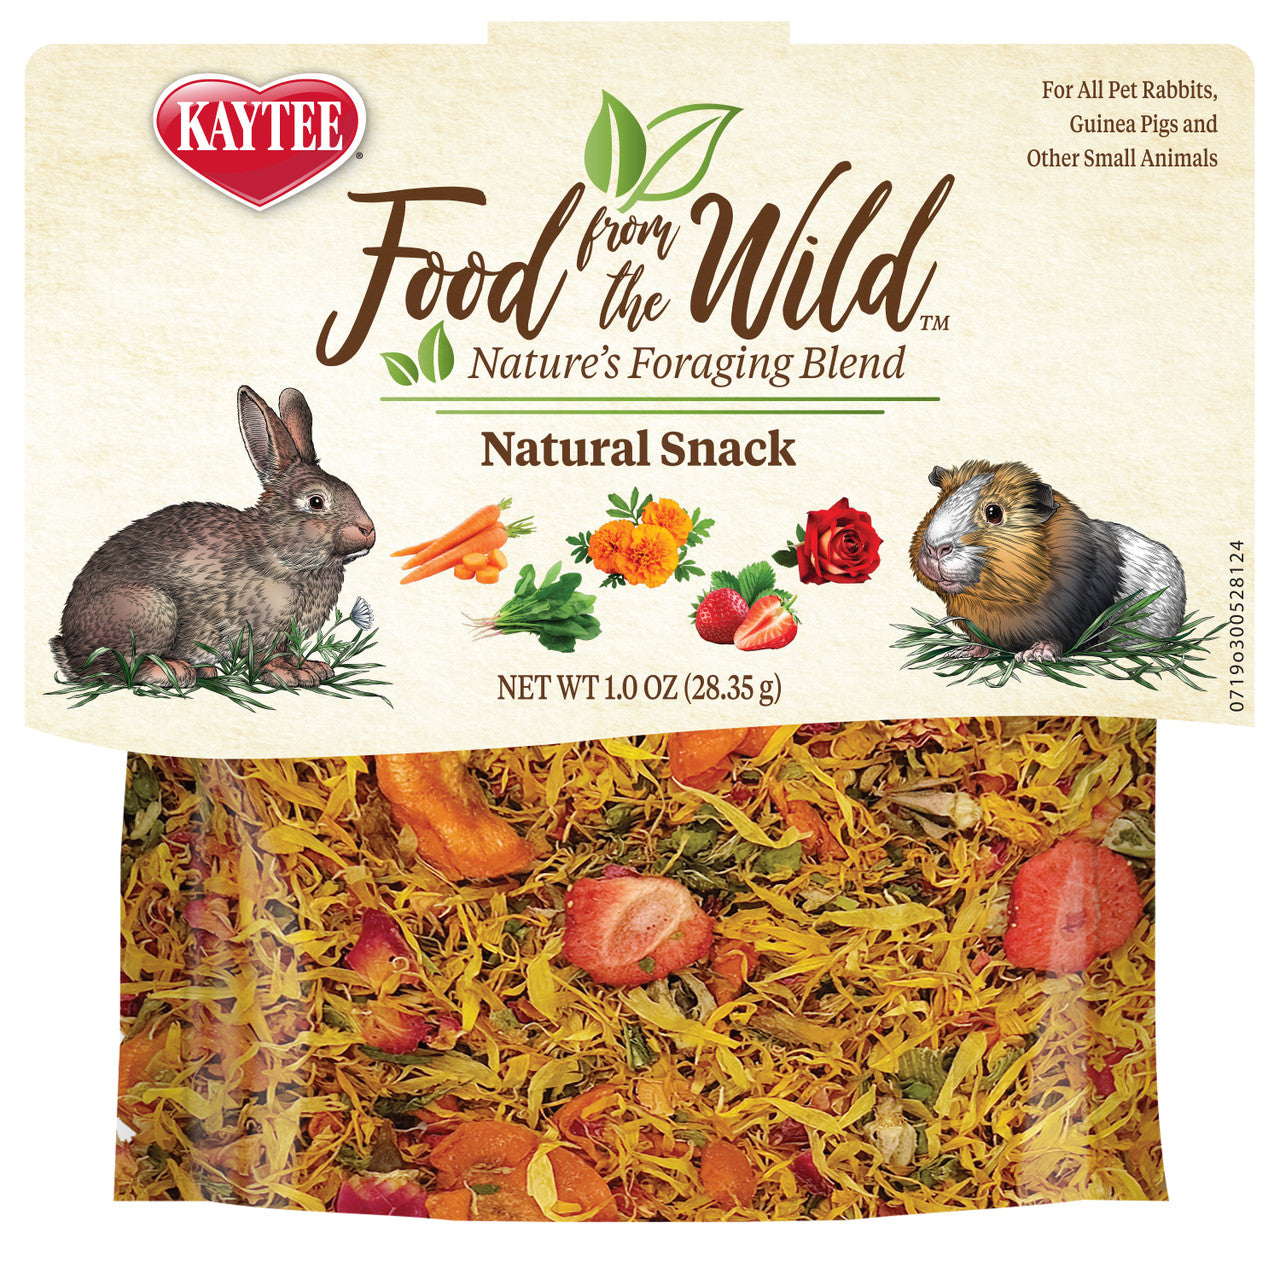 Kaytee Food From the Wild Natural Snack Rabbit and Guinea Pig 1 Ounce